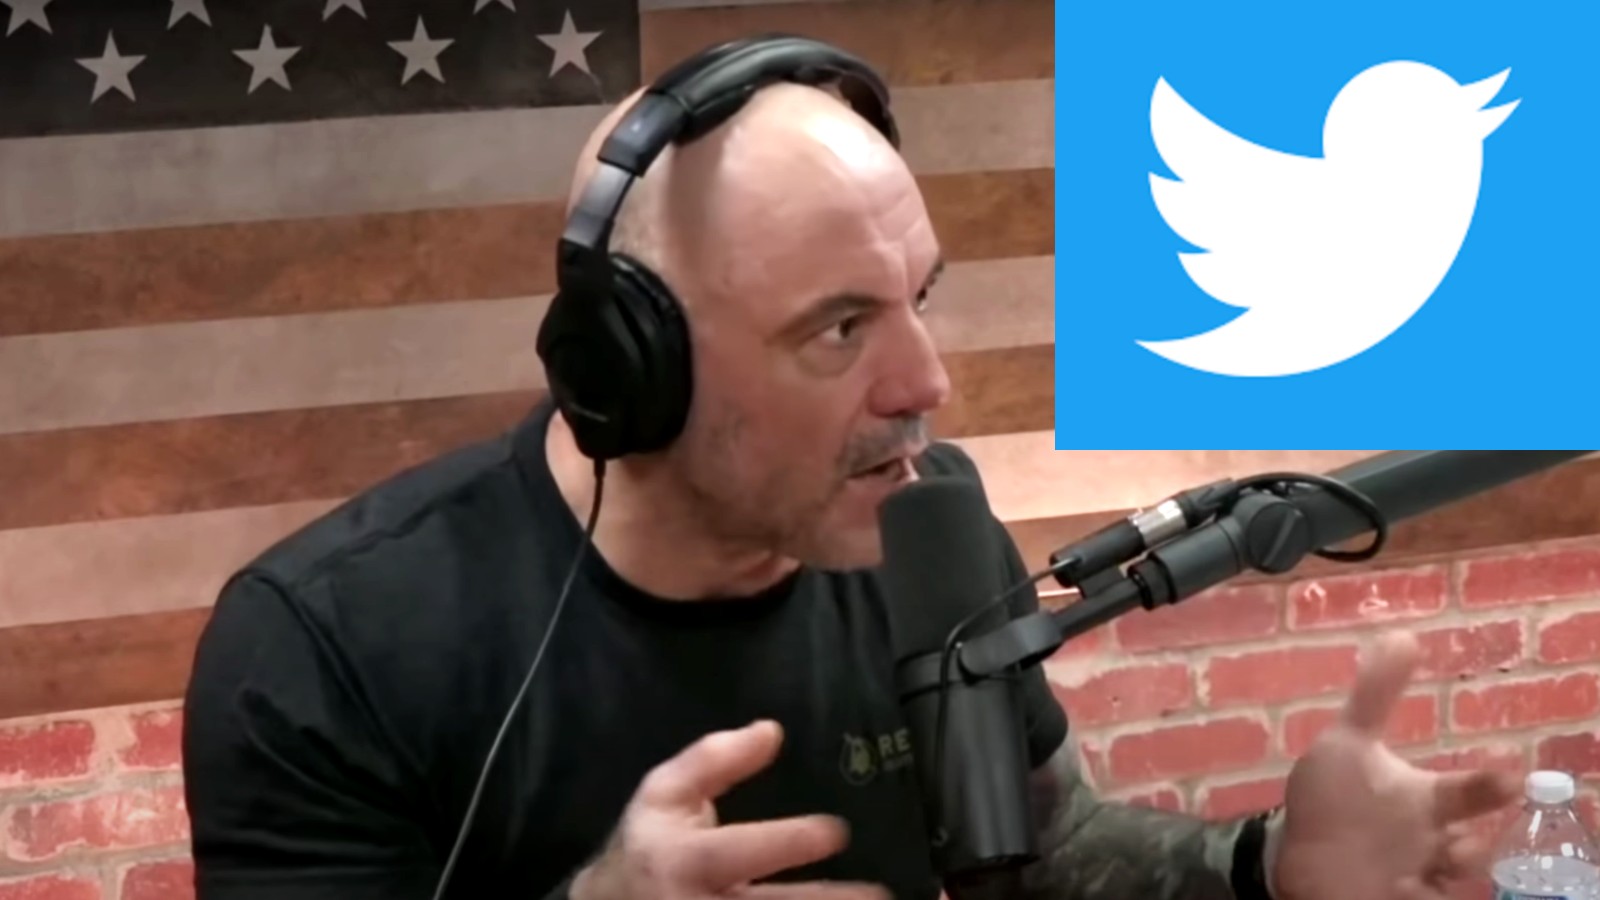 Joe Rogan explains why "toxic" Twitter is ruining the younger